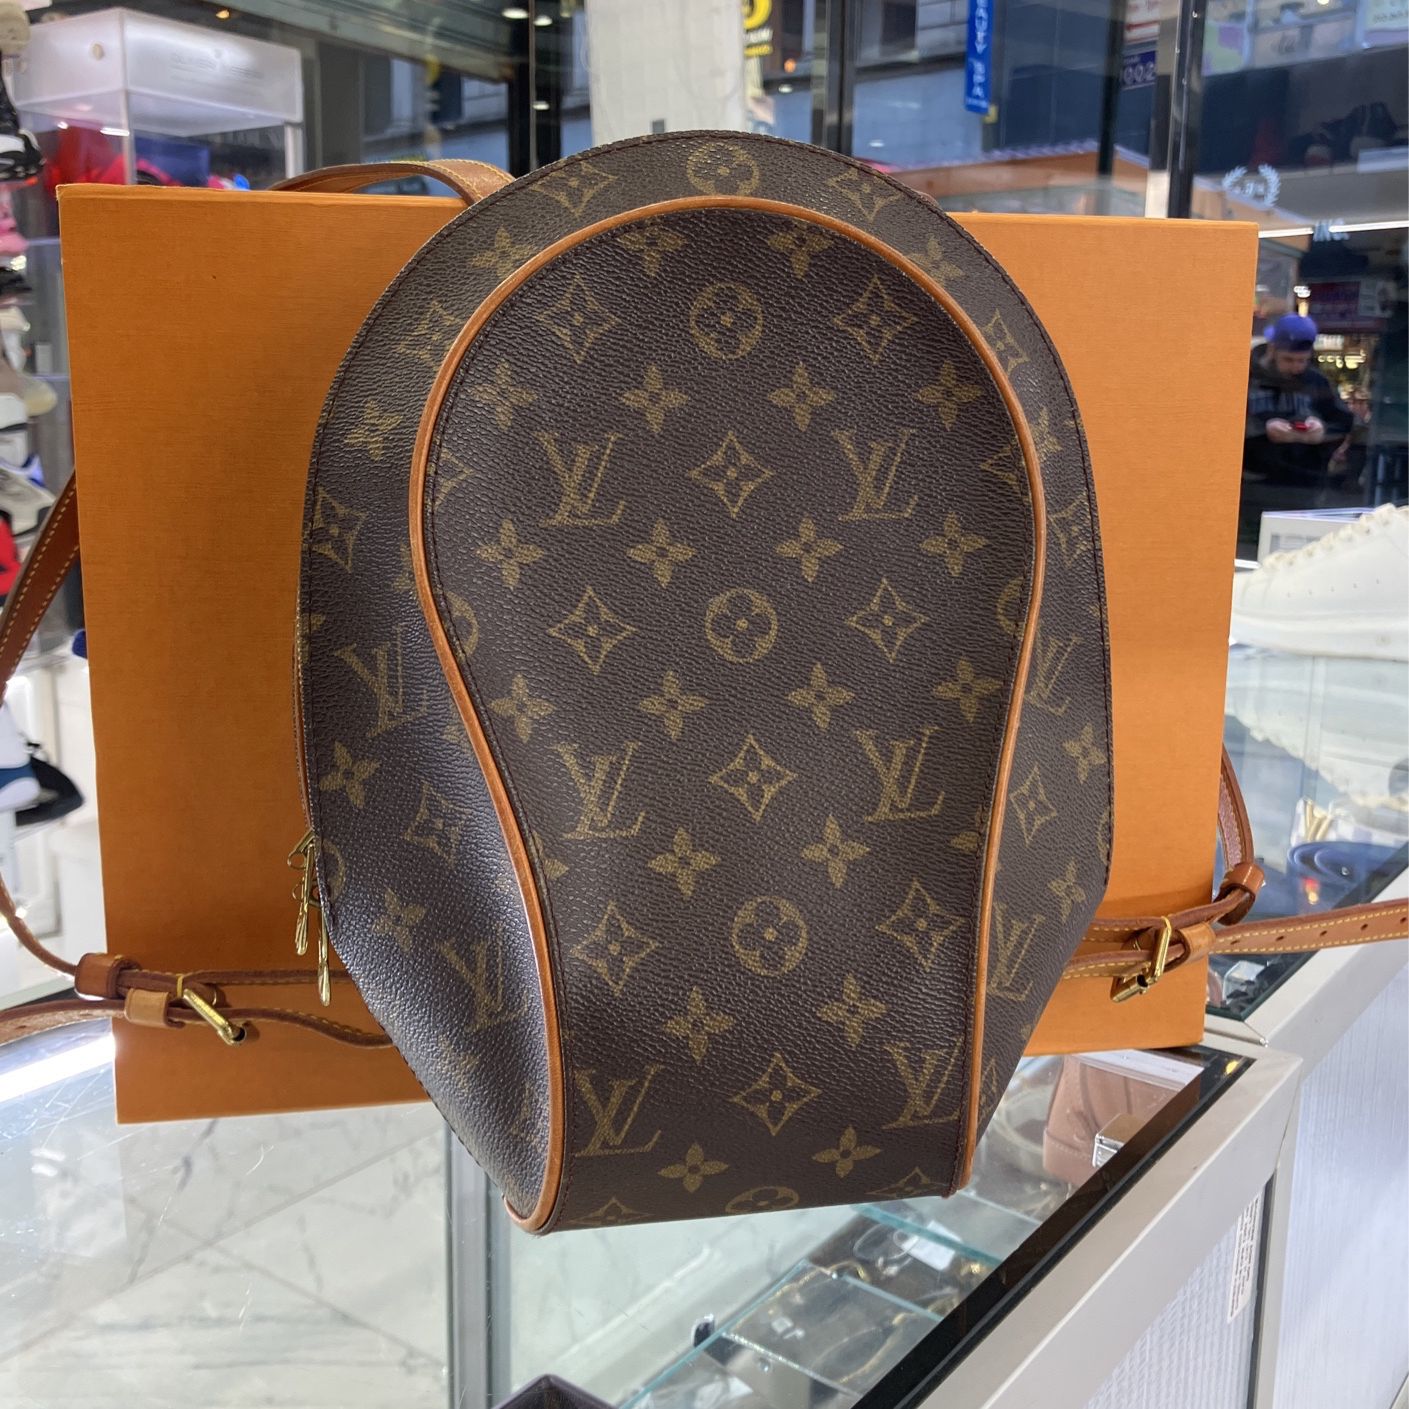 Louis Vuitton Sling Bag for Sale in Peck Slip, NY - OfferUp